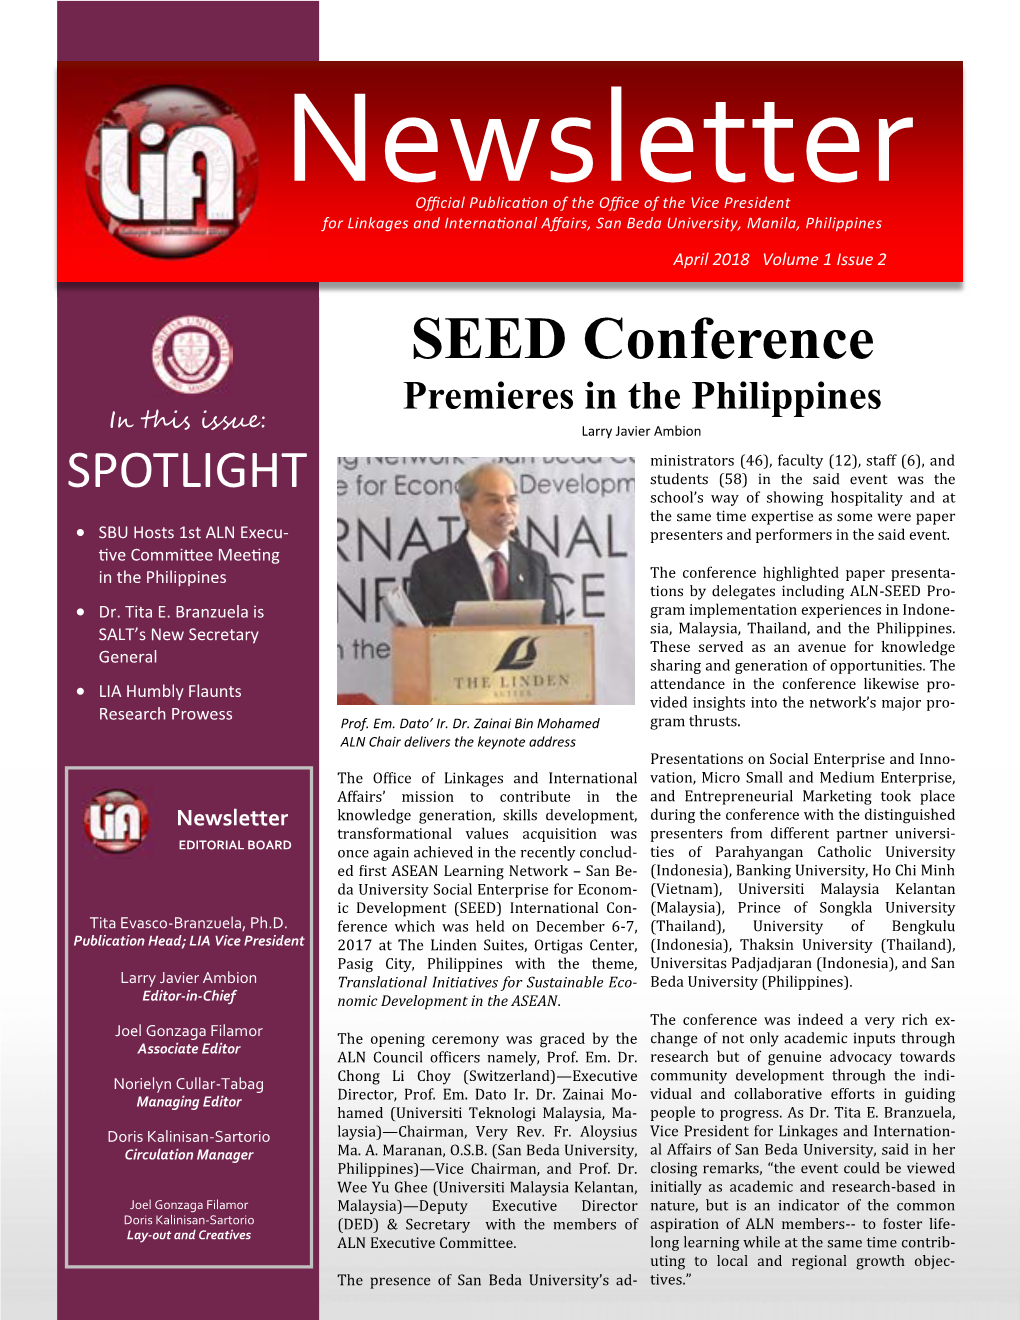 SEED Conference